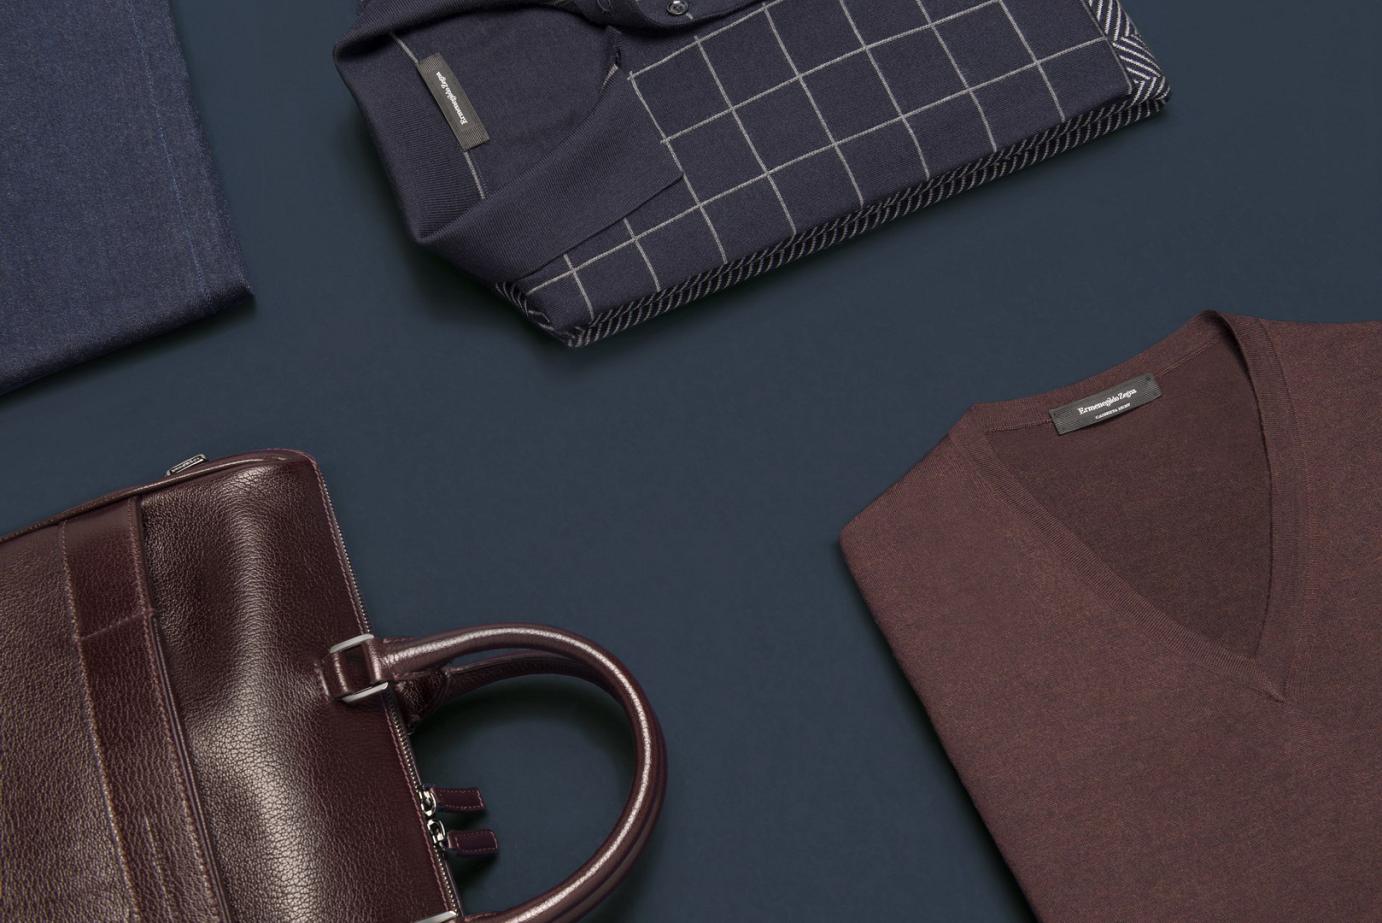 CoqCreative power by ProductionLink s.r.l. Zegna-Accessorizes Zegna-Accessorizes  Zegna-Accessorizes